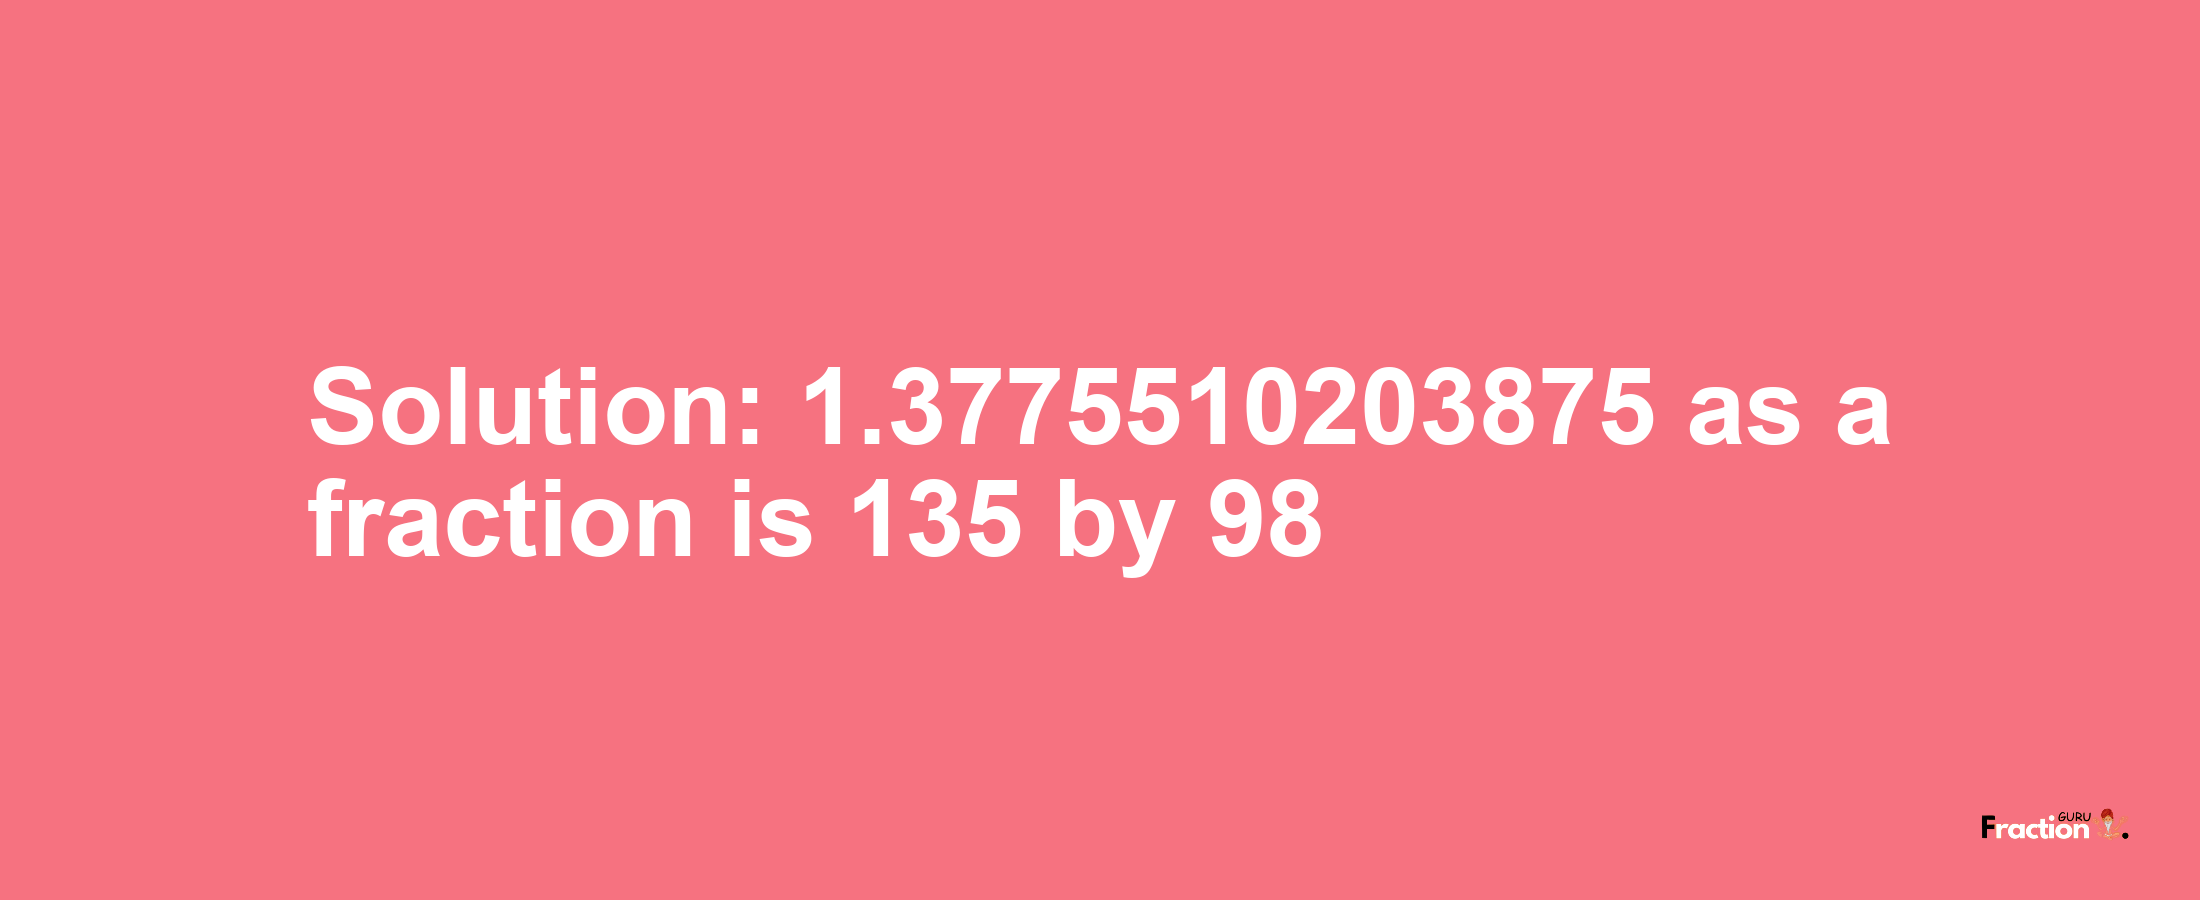 Solution:1.3775510203875 as a fraction is 135/98